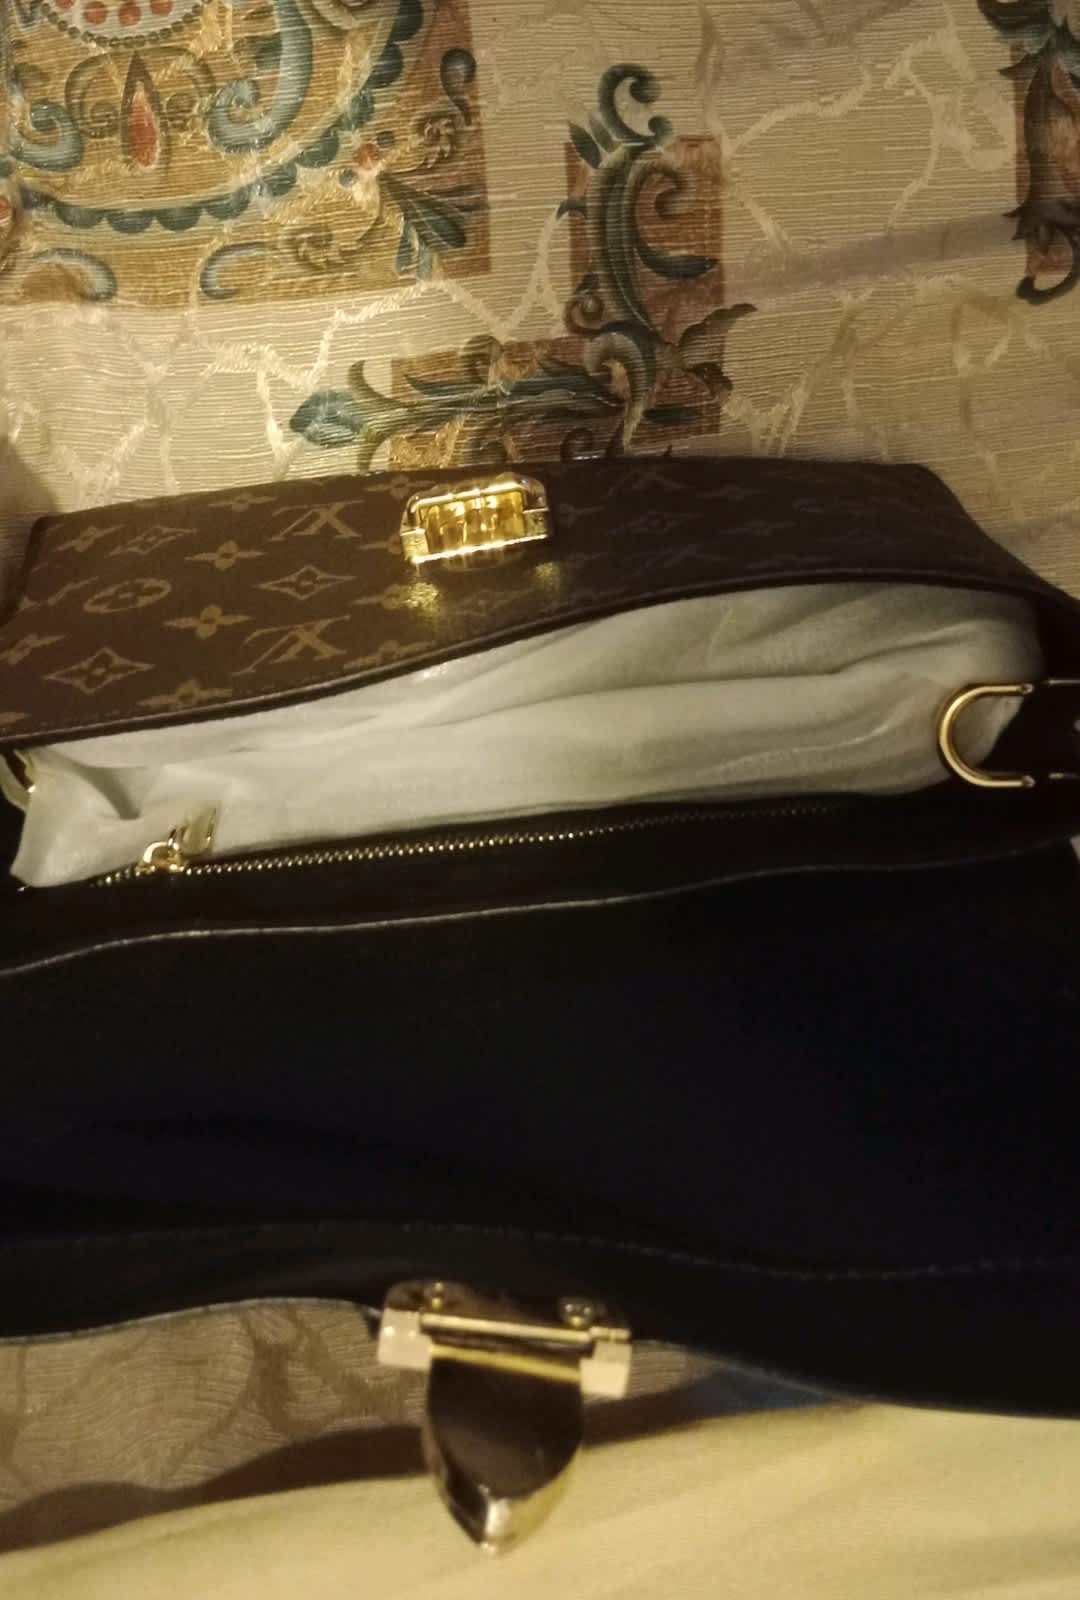 LOUIS VUITTON Limited Edition Monogram Cosmetic Pouch PM, Bags, Gumtree  Australia Hurstville Area - Beverly Hills